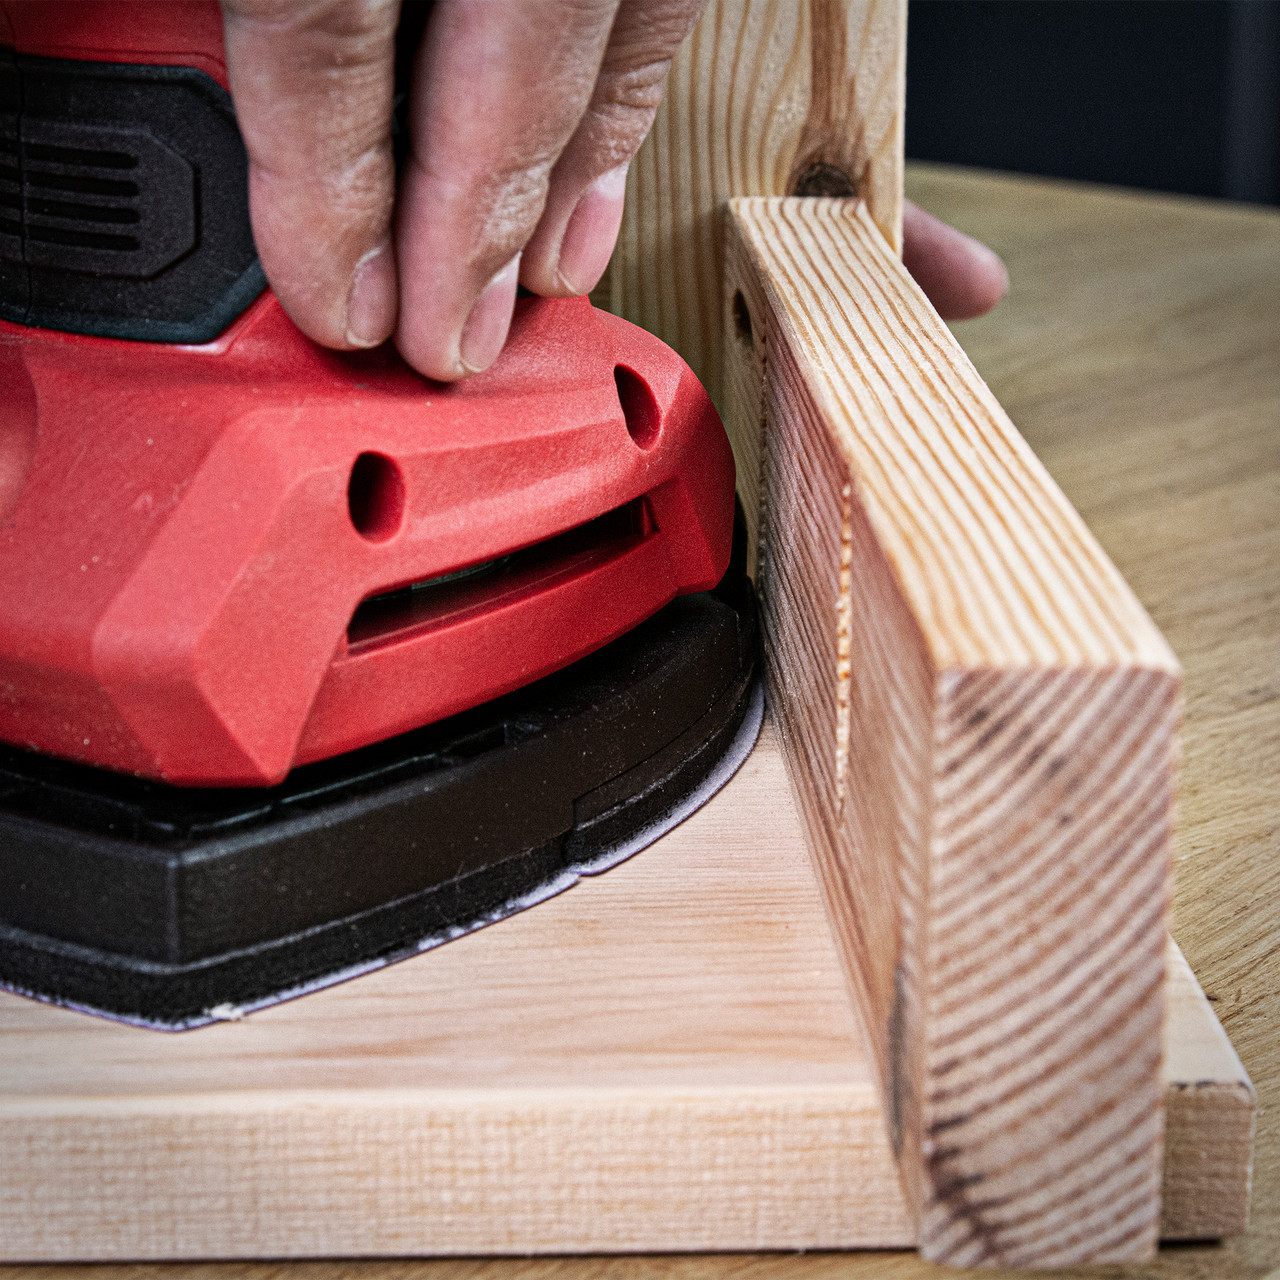 Detail Sander Applications Include flat areas, sanding into corners, removal of old finishes, rust removal and metal finishing, heavy stock removal and primary preparation work